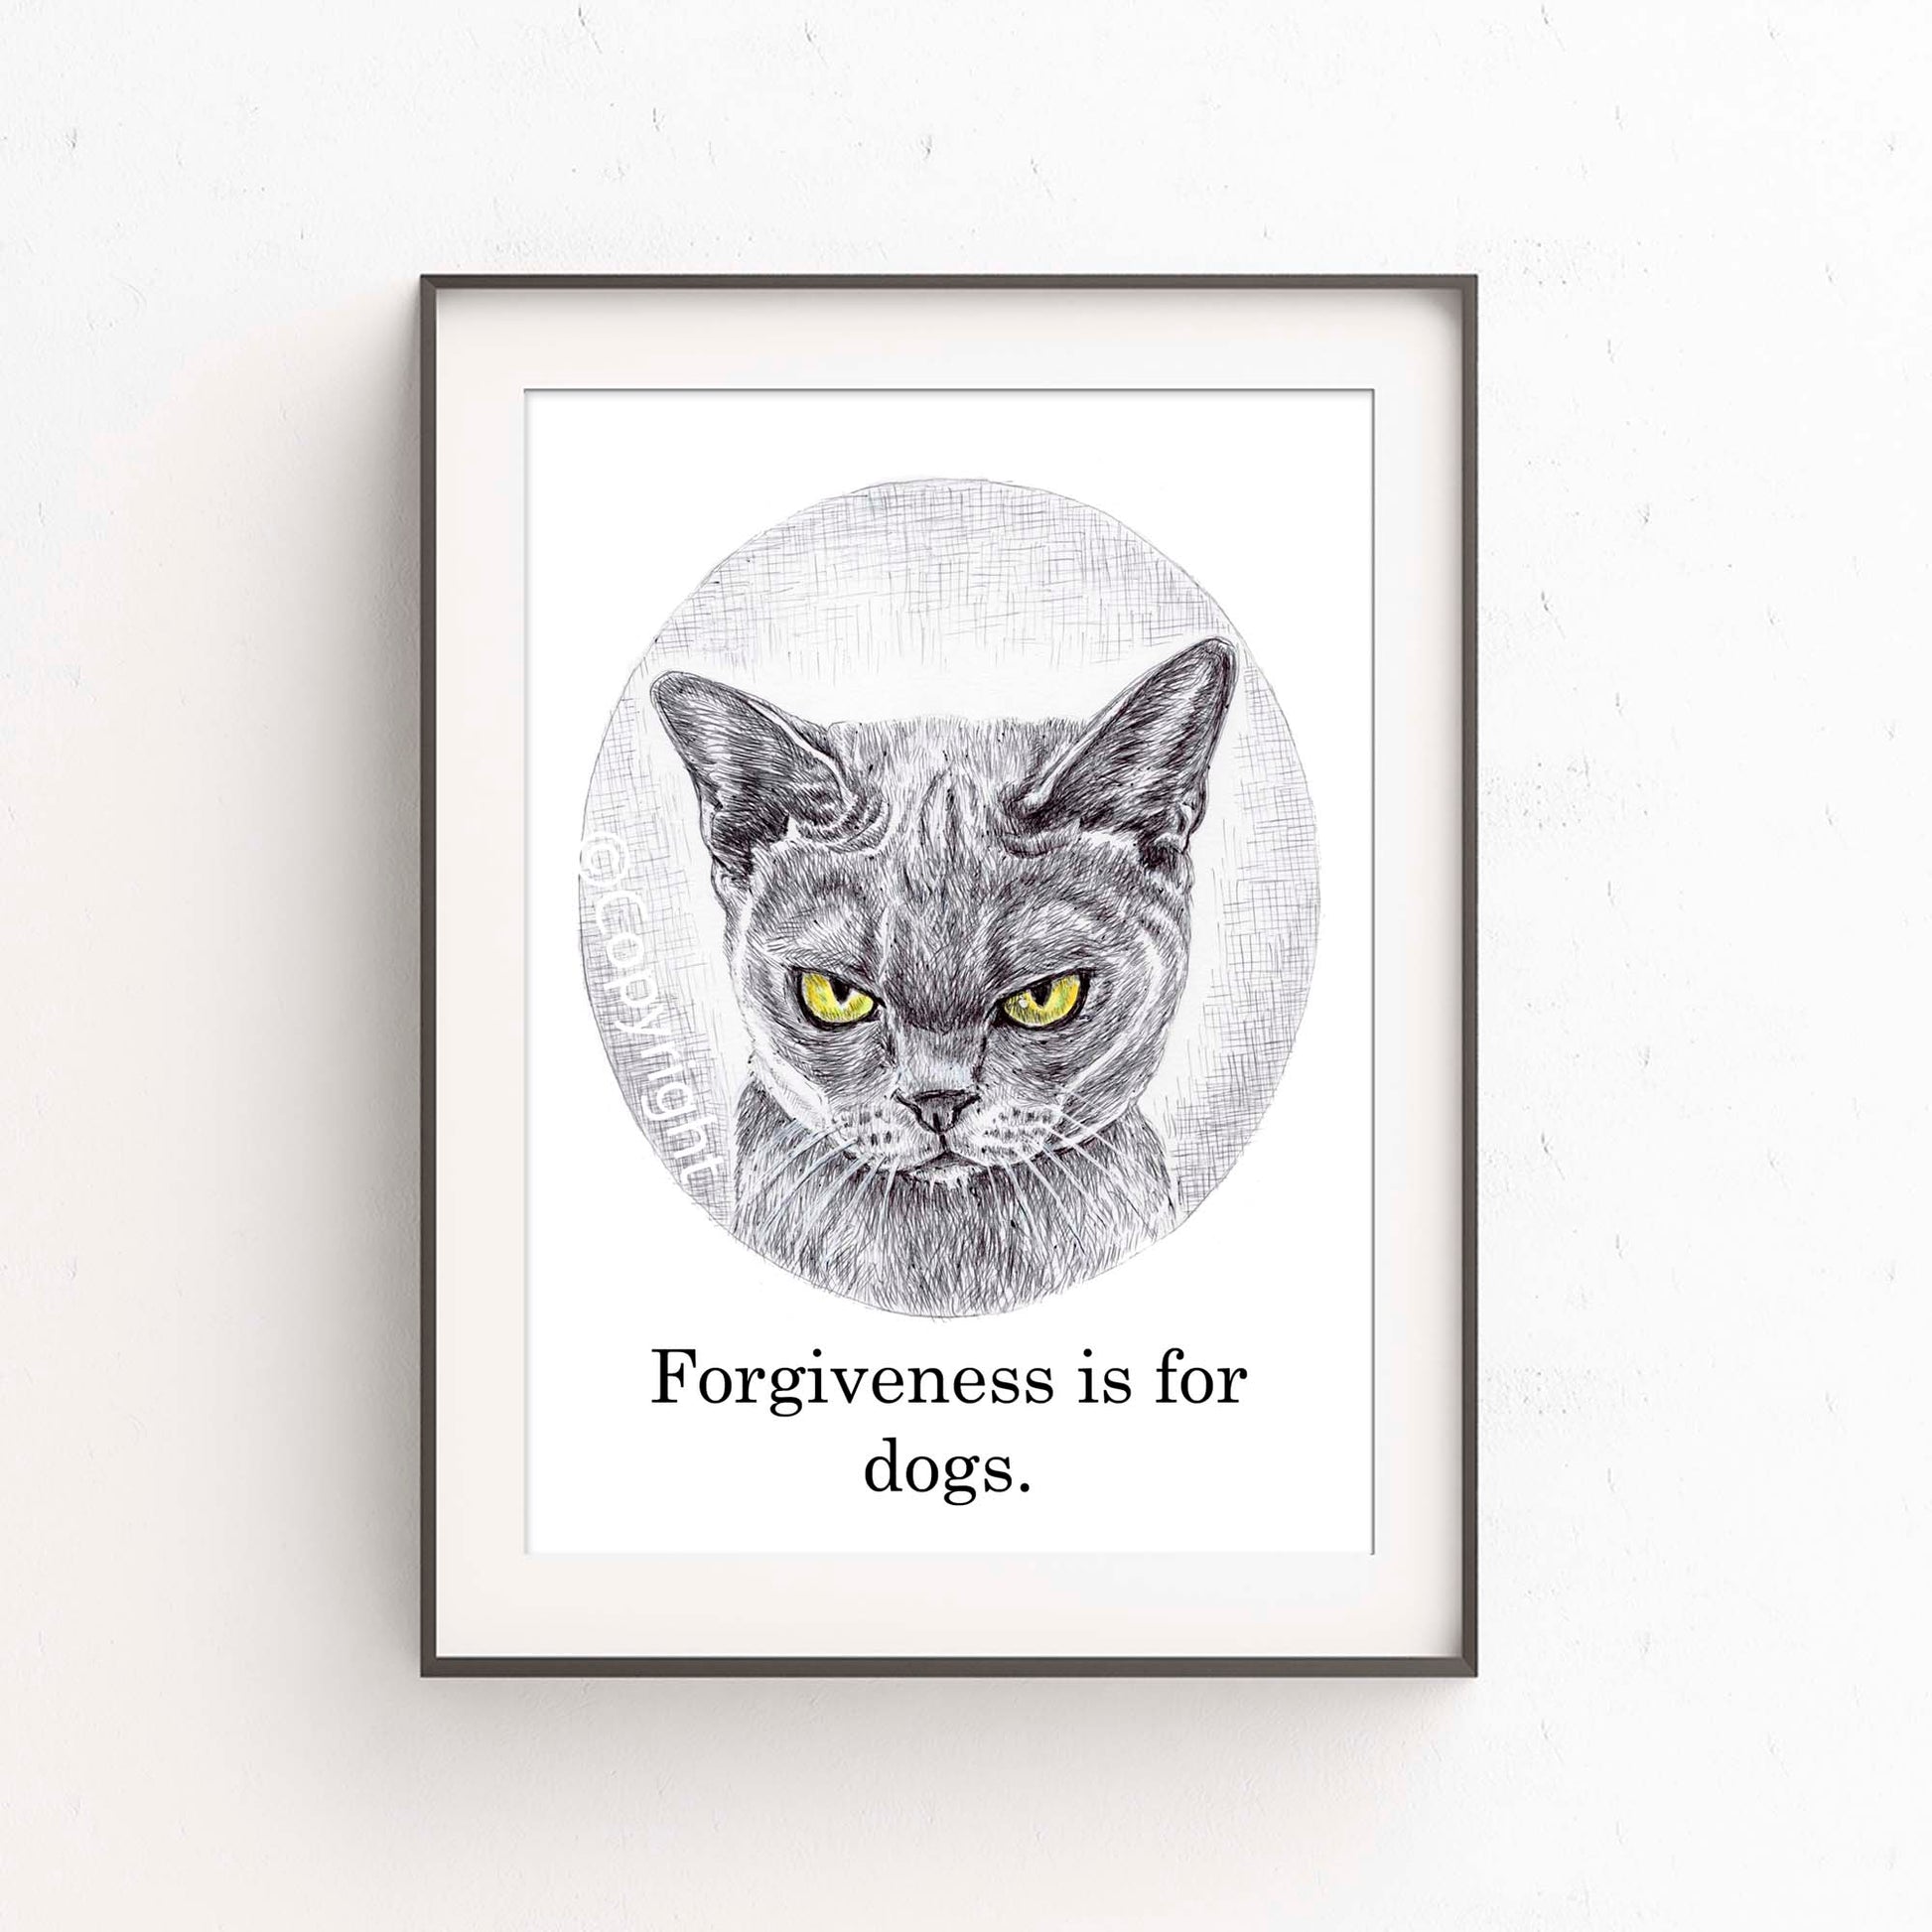 Ballpoint pen ink drawing of a very angry cat. Forgiveness is for dogs!